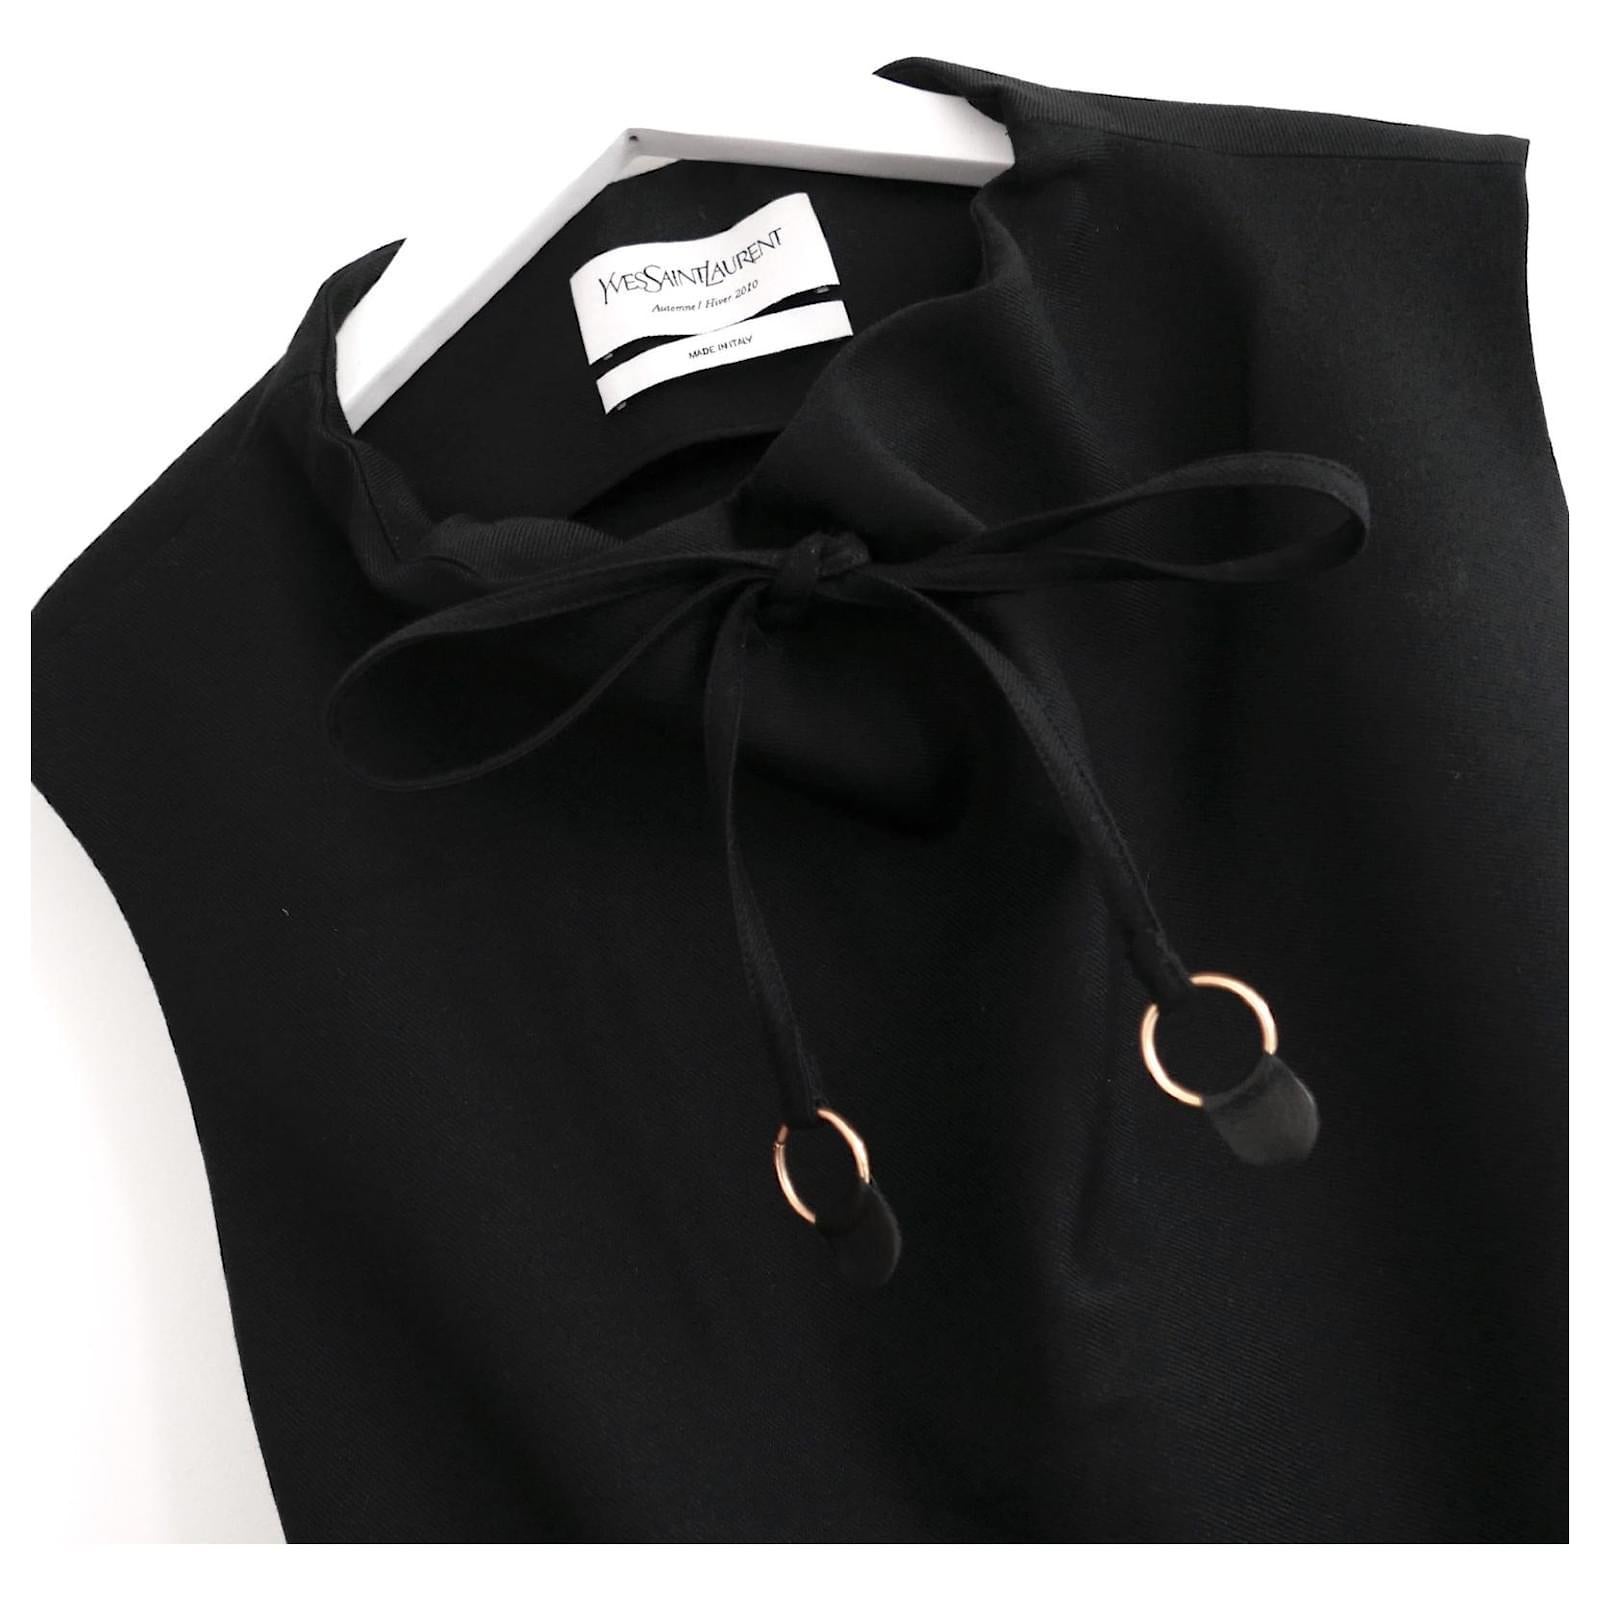 Stunning archival Yves Saint Laurent top from Stefano Pilati's Spring Fall 2010 Collection. 

Bought for £1250 and unworn. Made from semi structured black wool and silk, it is beautifully tailored with darted bodice and lined layered peplum hem. Has